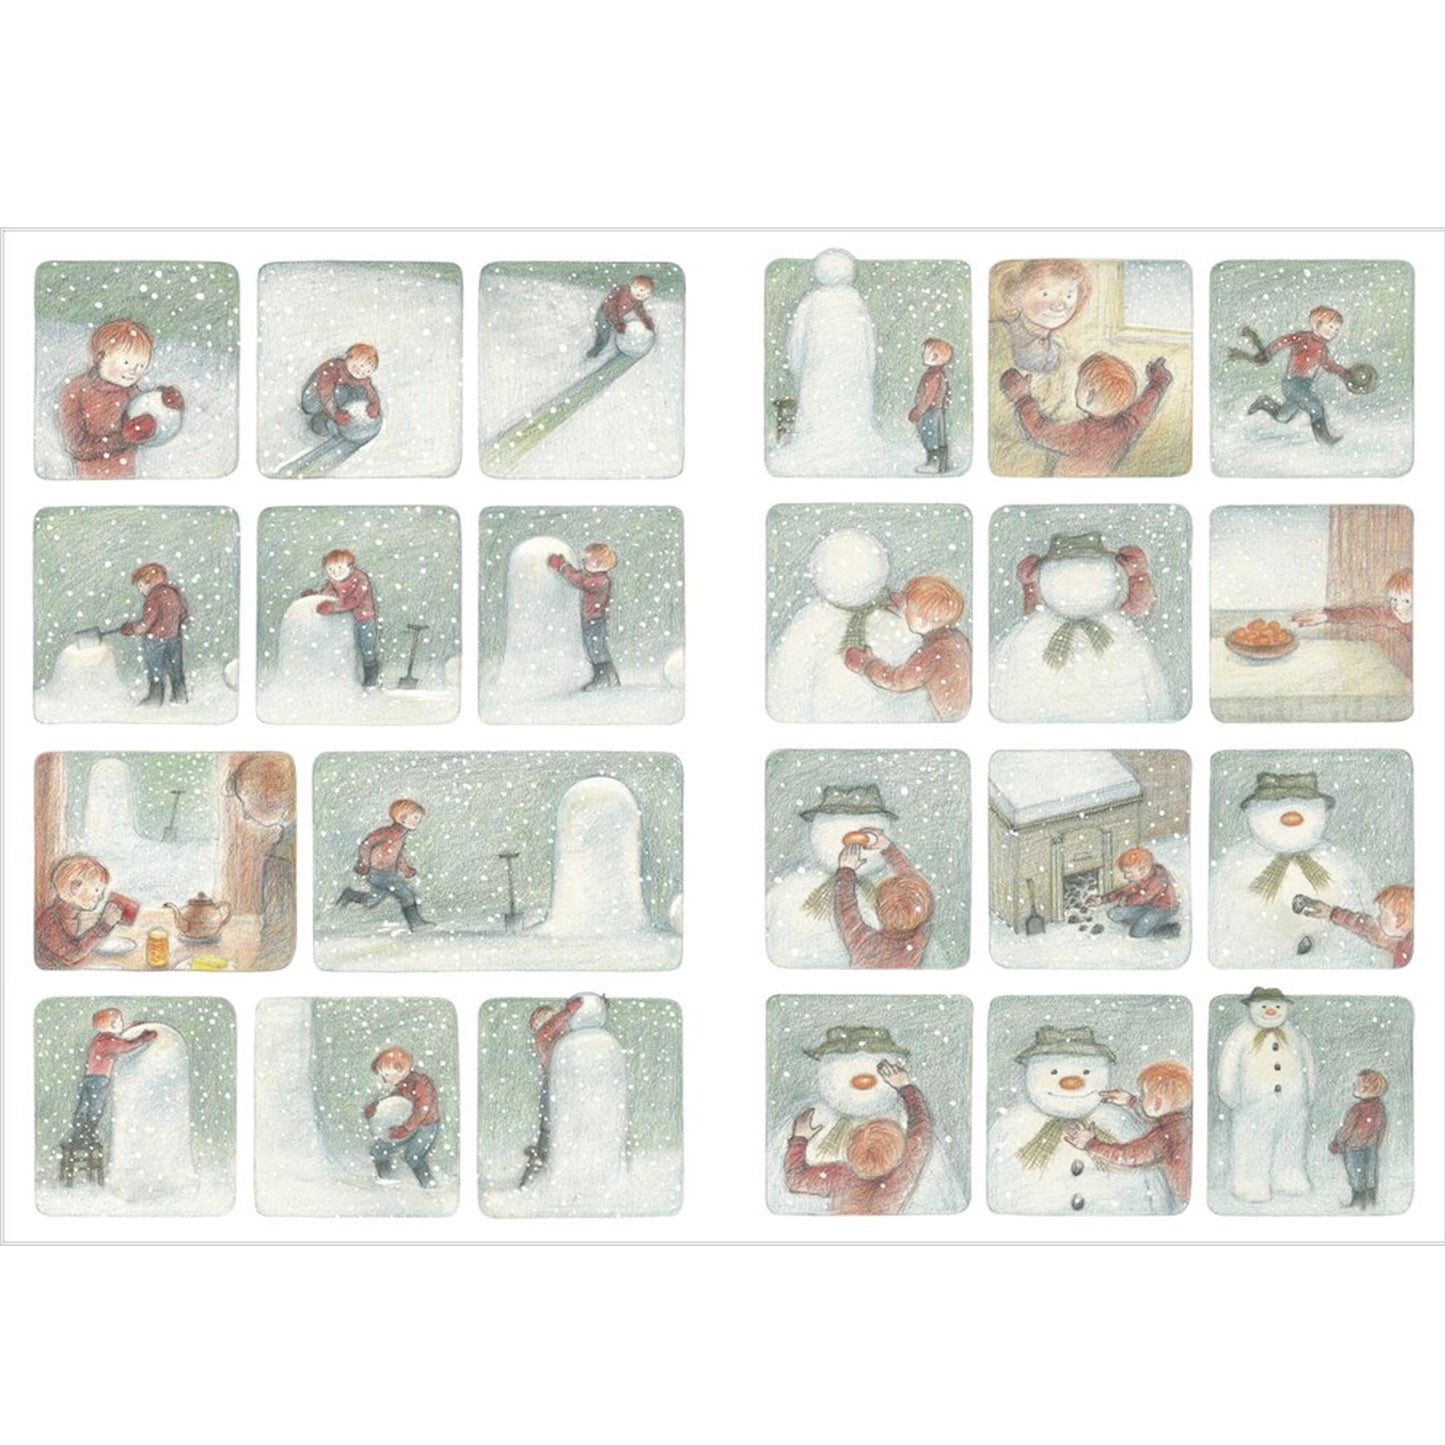 The Snowman - Picture Book